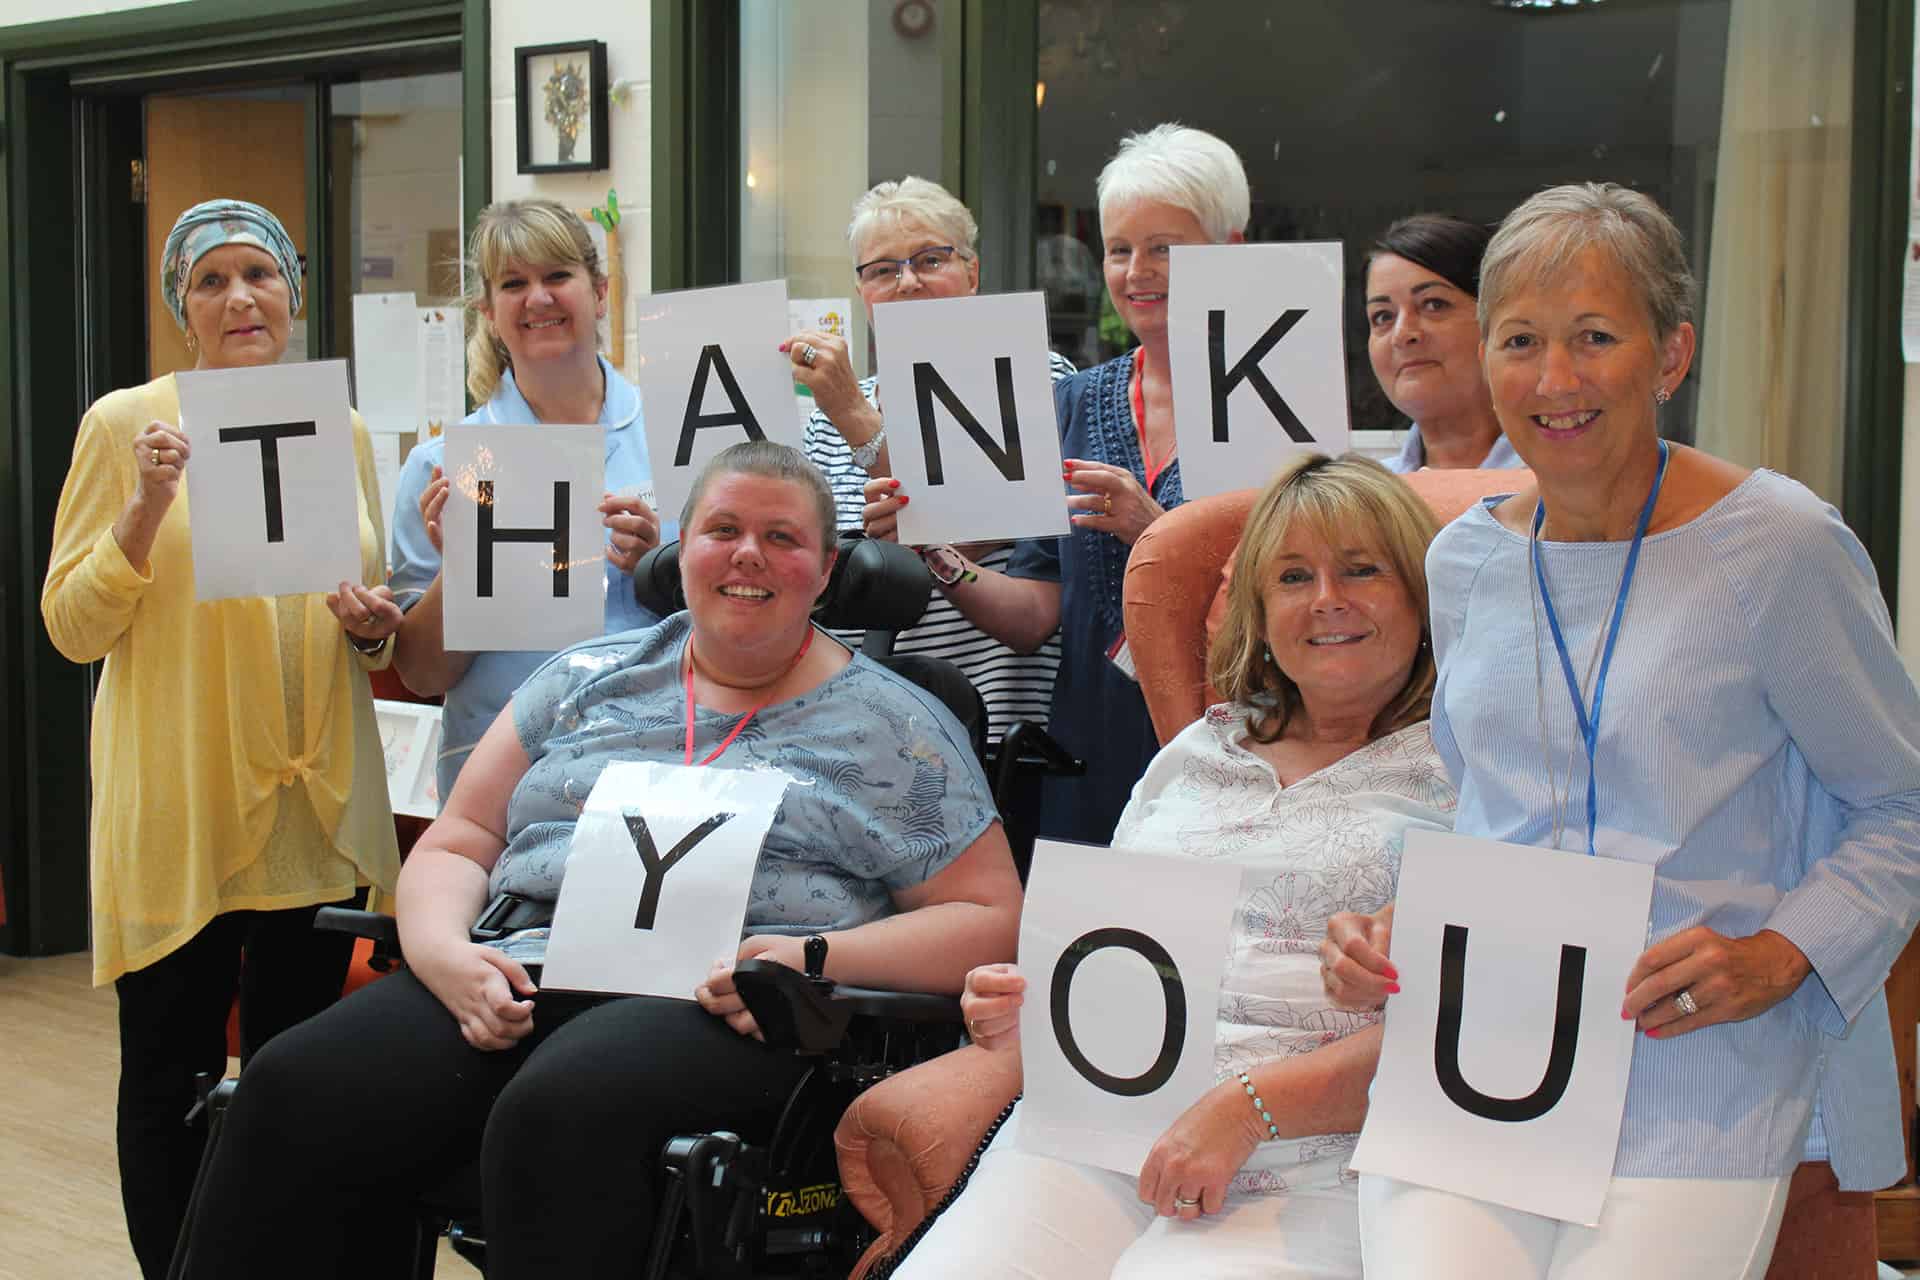 Hospice patients and nurses holding a sign that reads "Thank You".